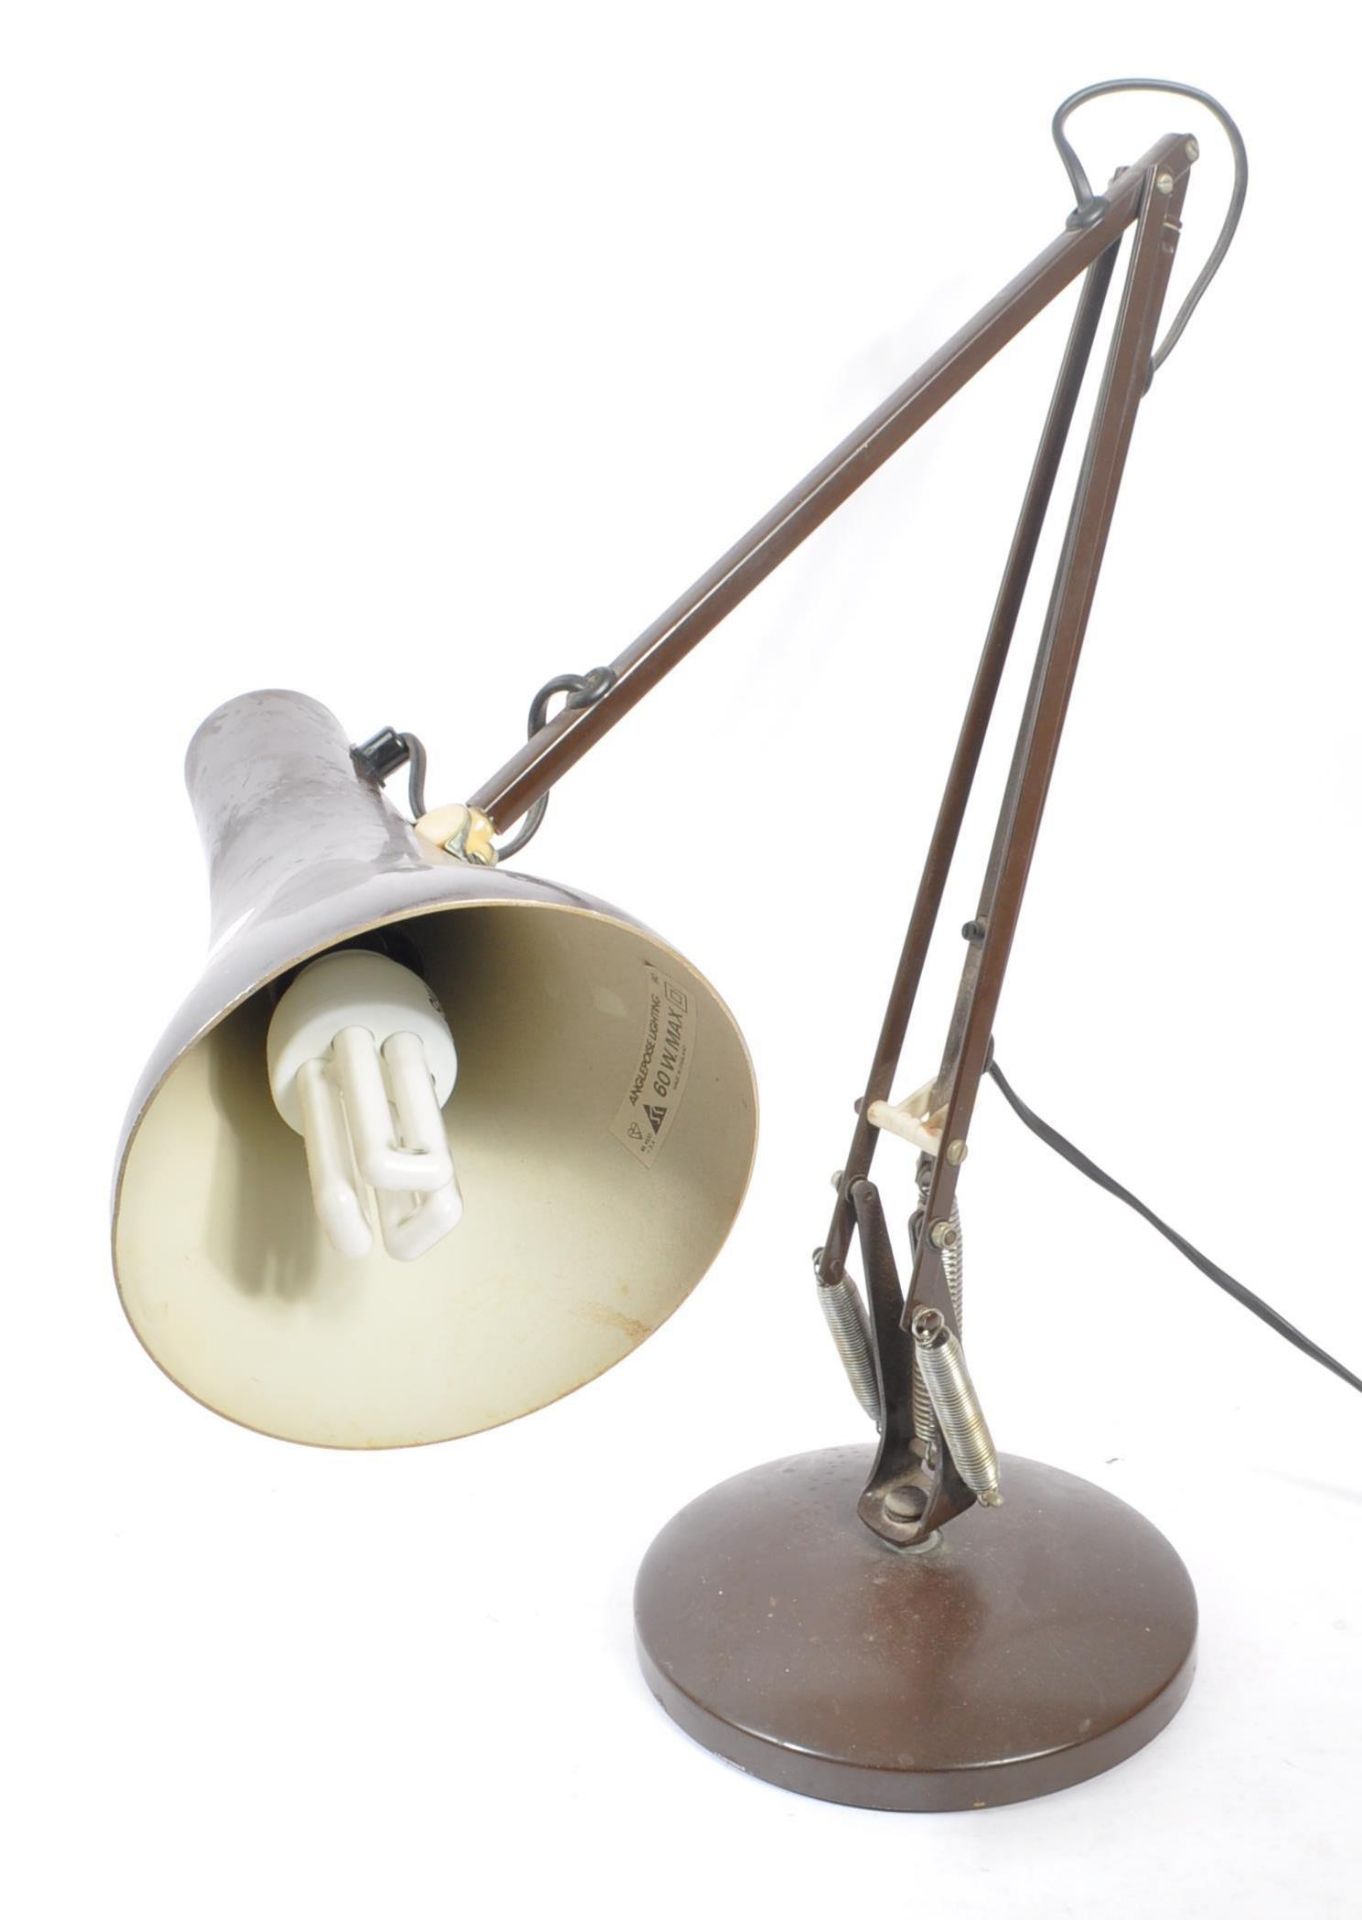 HERBERT TERRY & SONS - MODEL 90 MID CENTURY ANGLEPOISE LAMP - Image 5 of 6